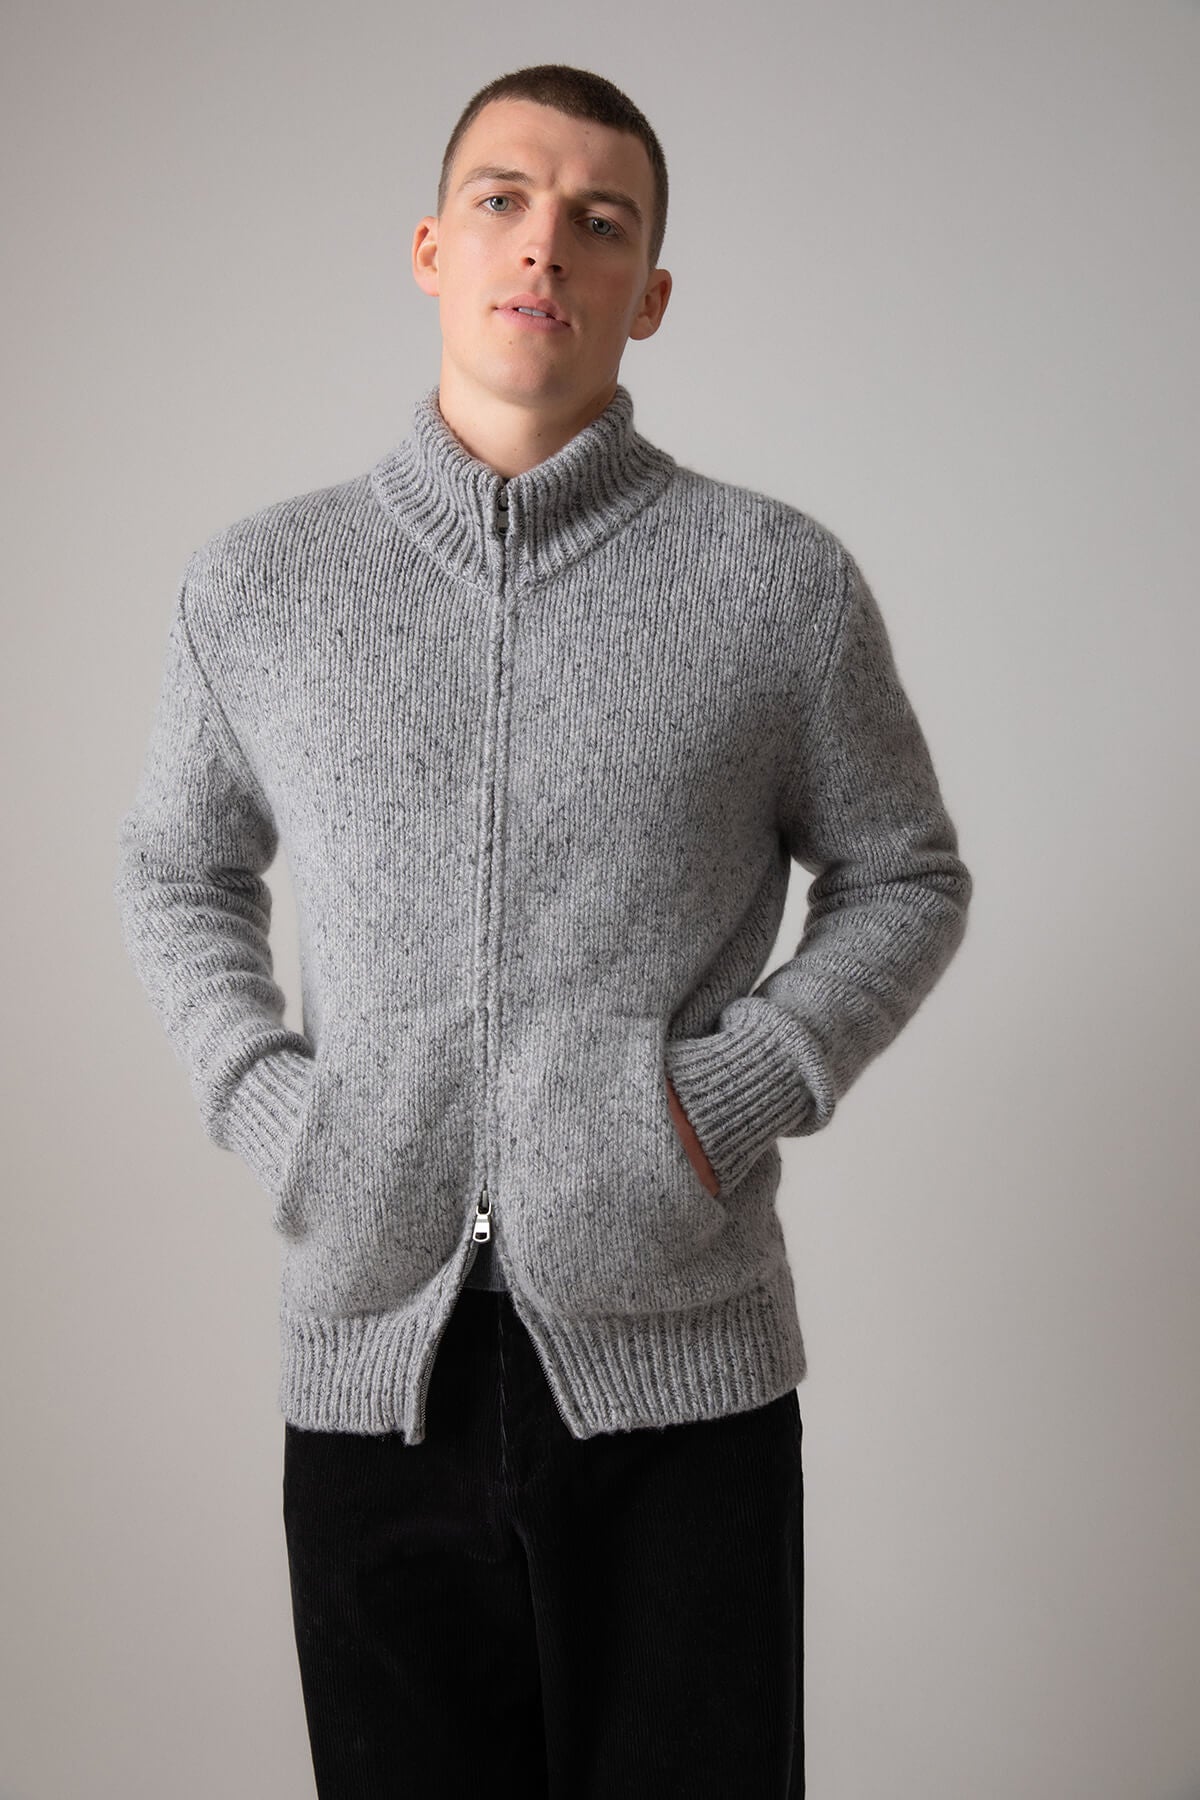 Johnstons of Elgin’s Men's Cashmere Donegal Zip Turtle Neck Cardigan in Light Grey on model wearing black trousers on a grey background KAB05115Q23711